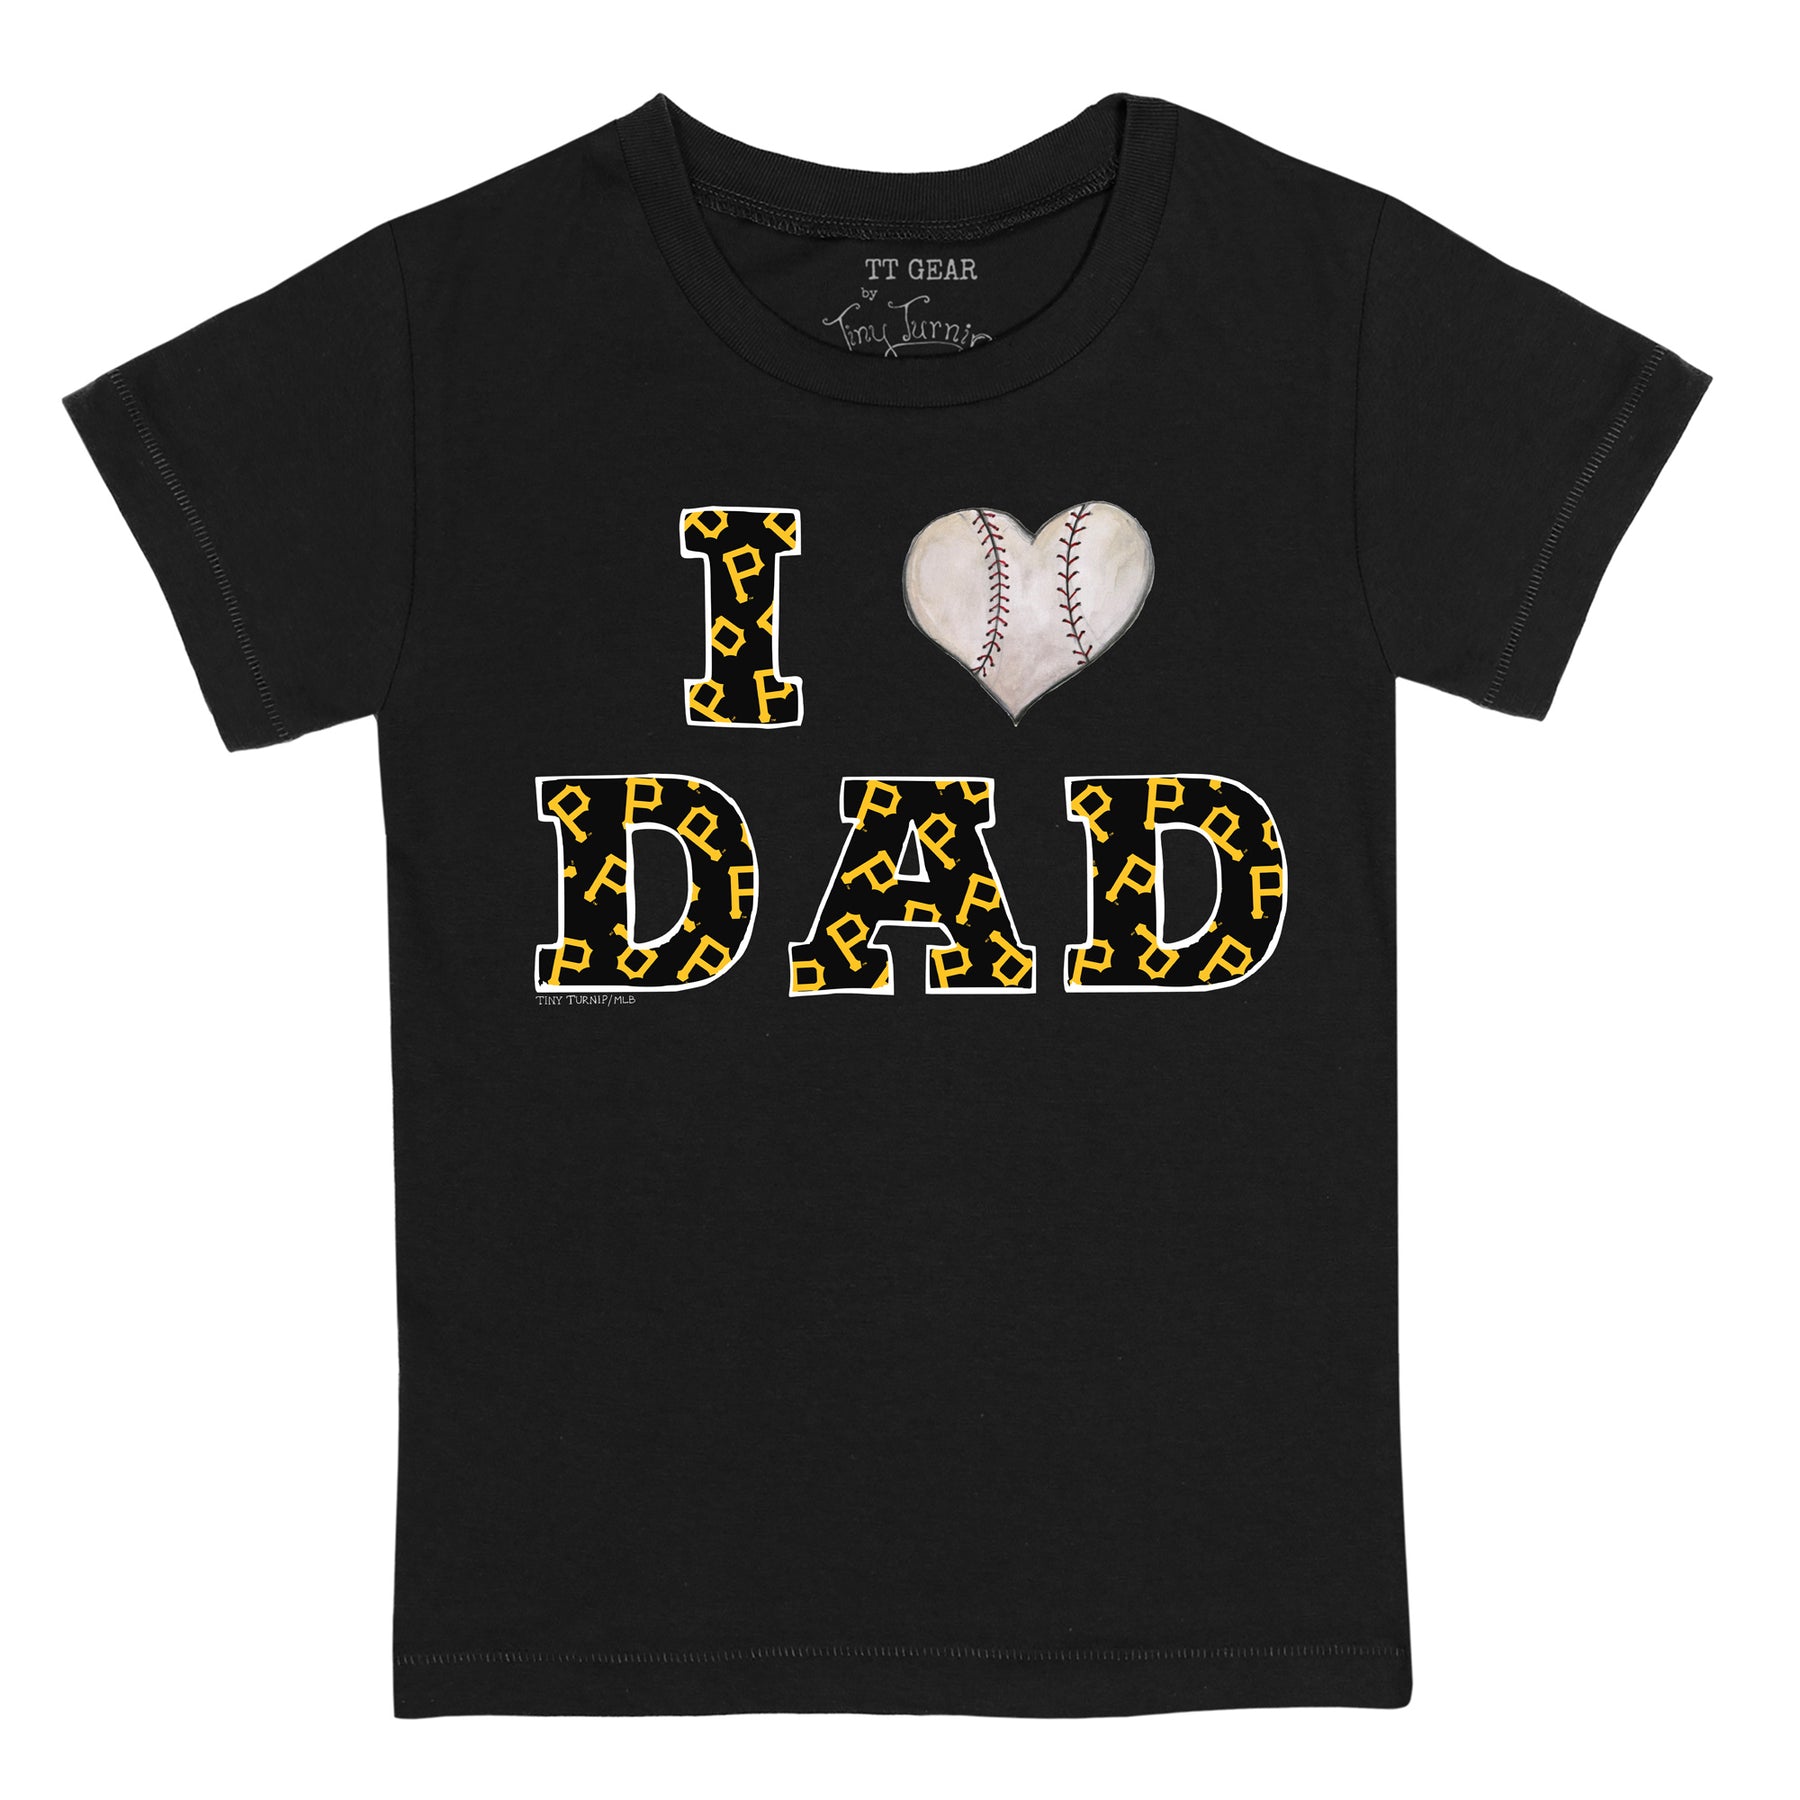 Pittsburgh Pirates I Love Dad Short Sleeve Snapper 24M / White